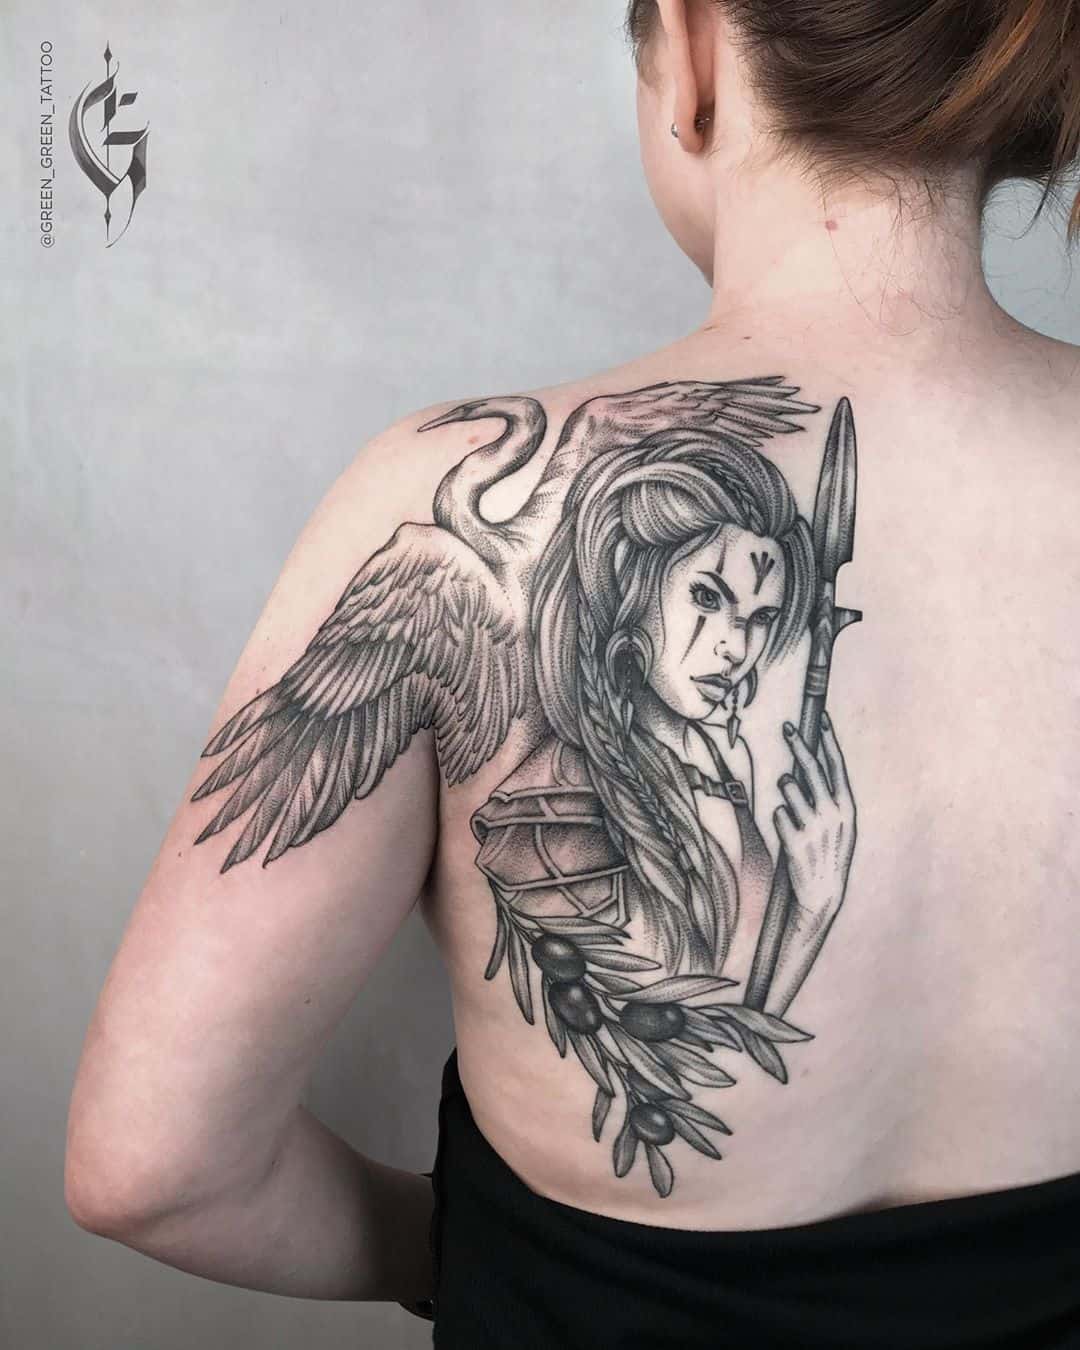 10 Best Viking Valkyrie Tattoo DesignsCollected By Daily Hind News